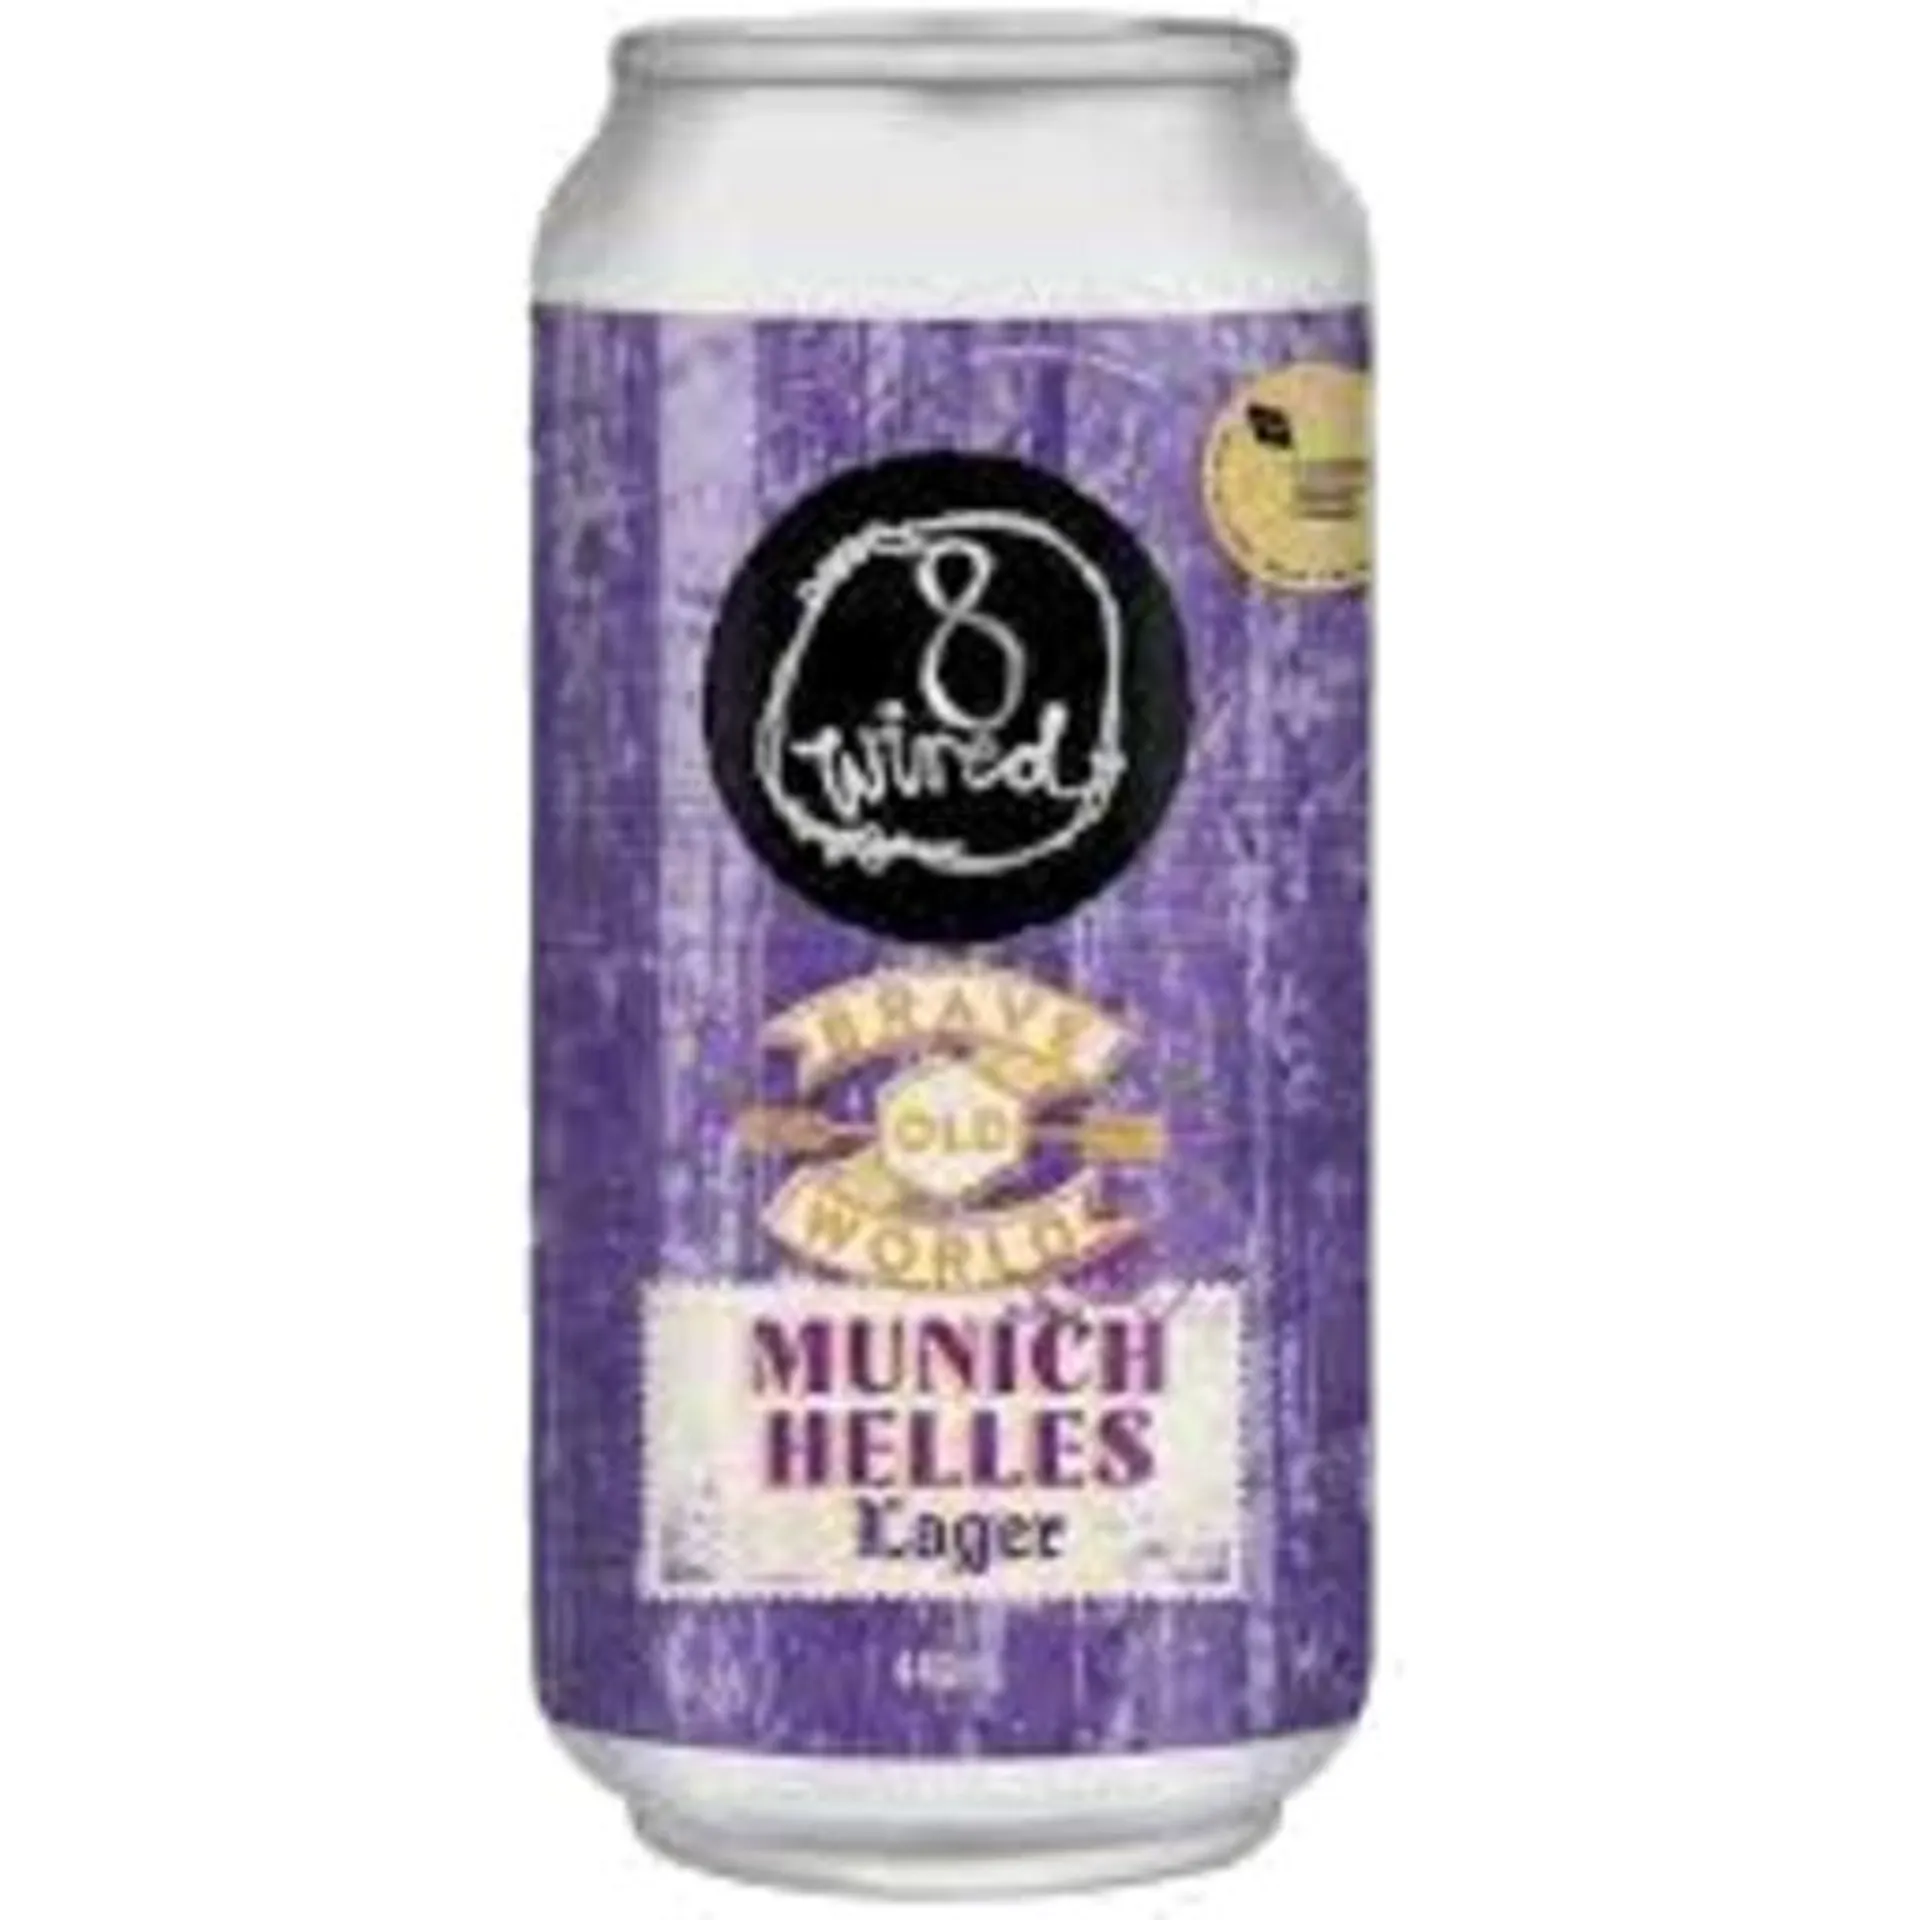 8 Wired Bow Munich Helles Lager 440ml